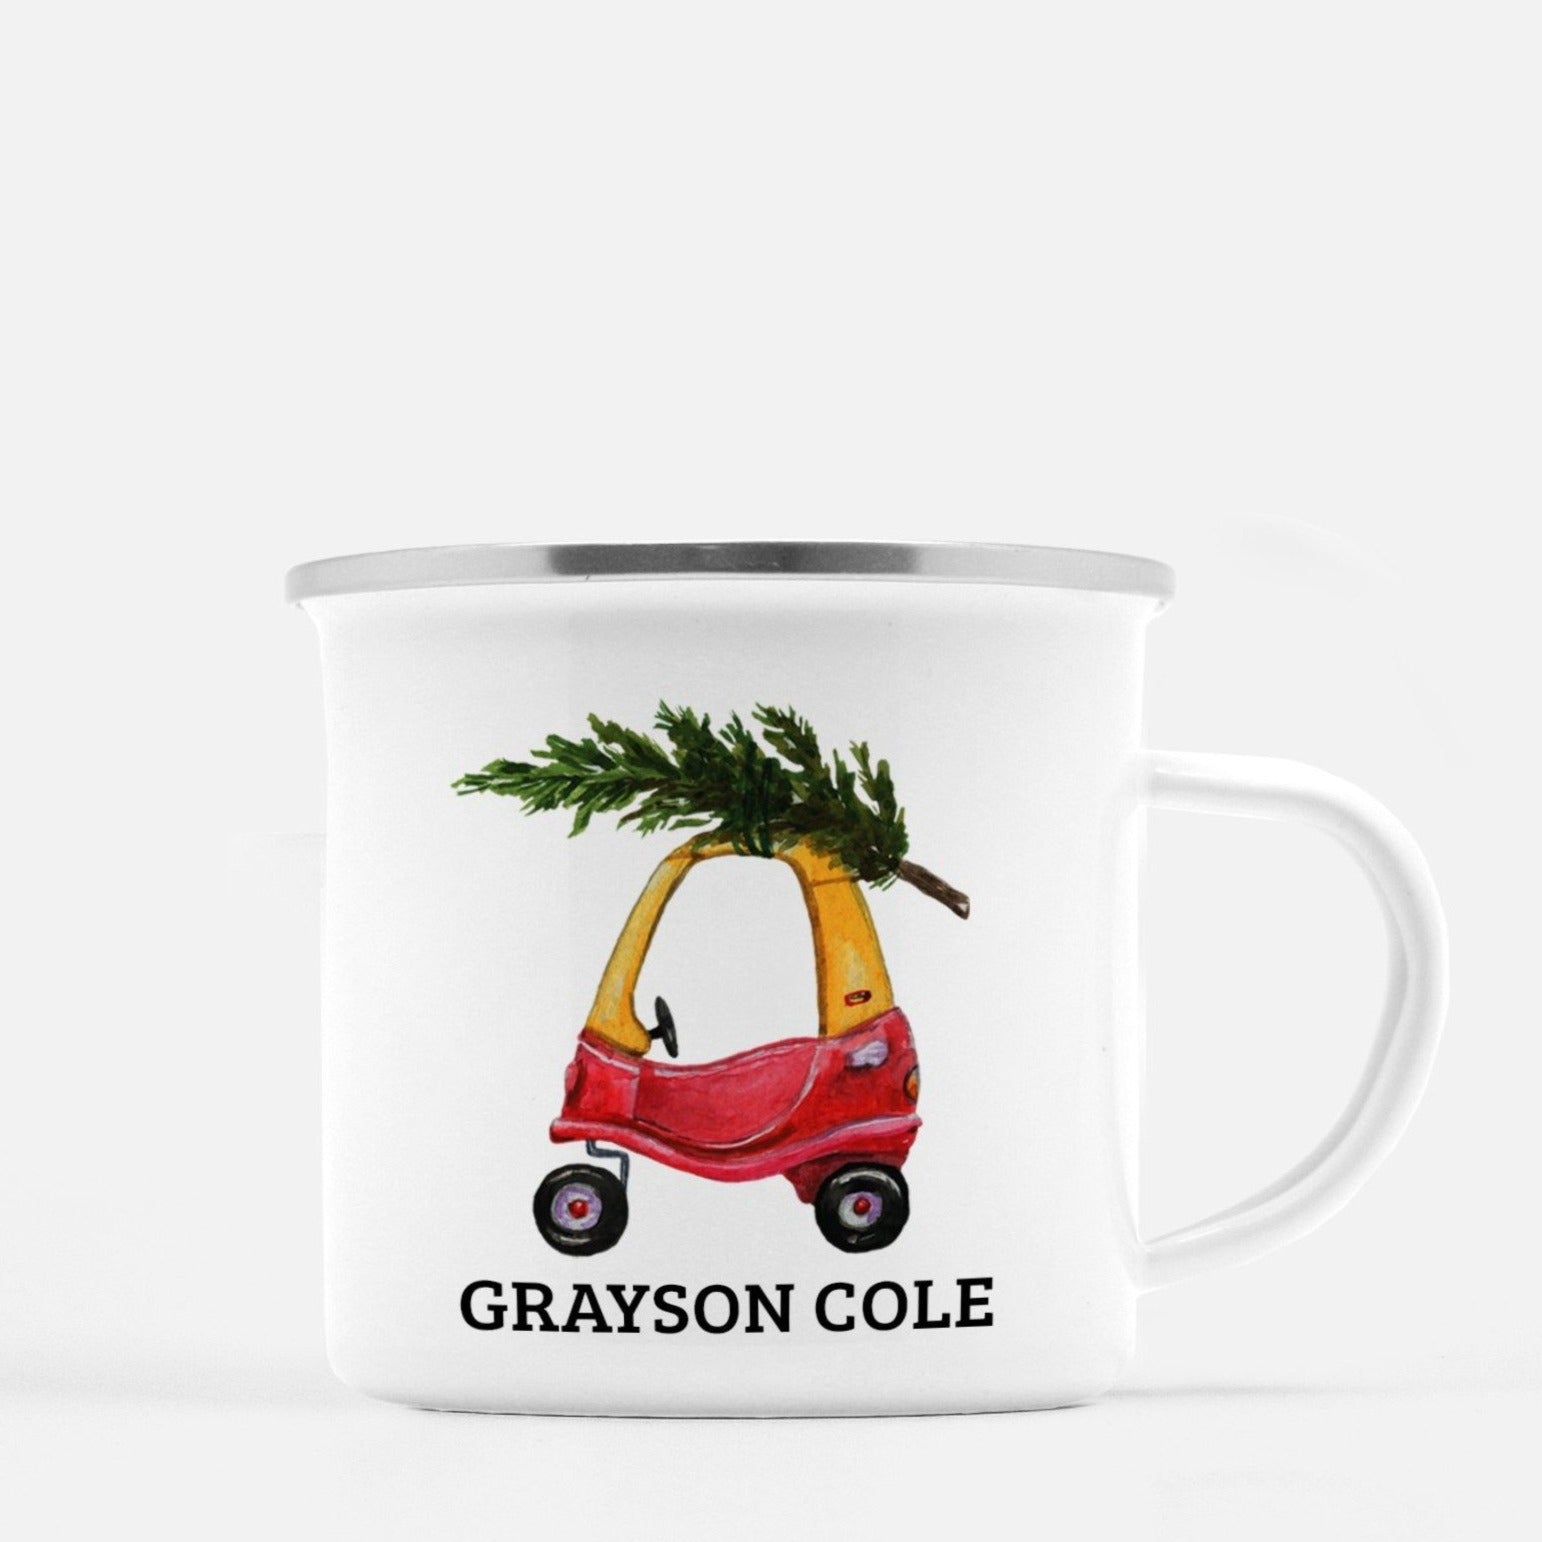 Fun personalized white enamel camp mug with silver lip - Your favorite toy car with tree design personalized with your child's name | PIPSY.COM